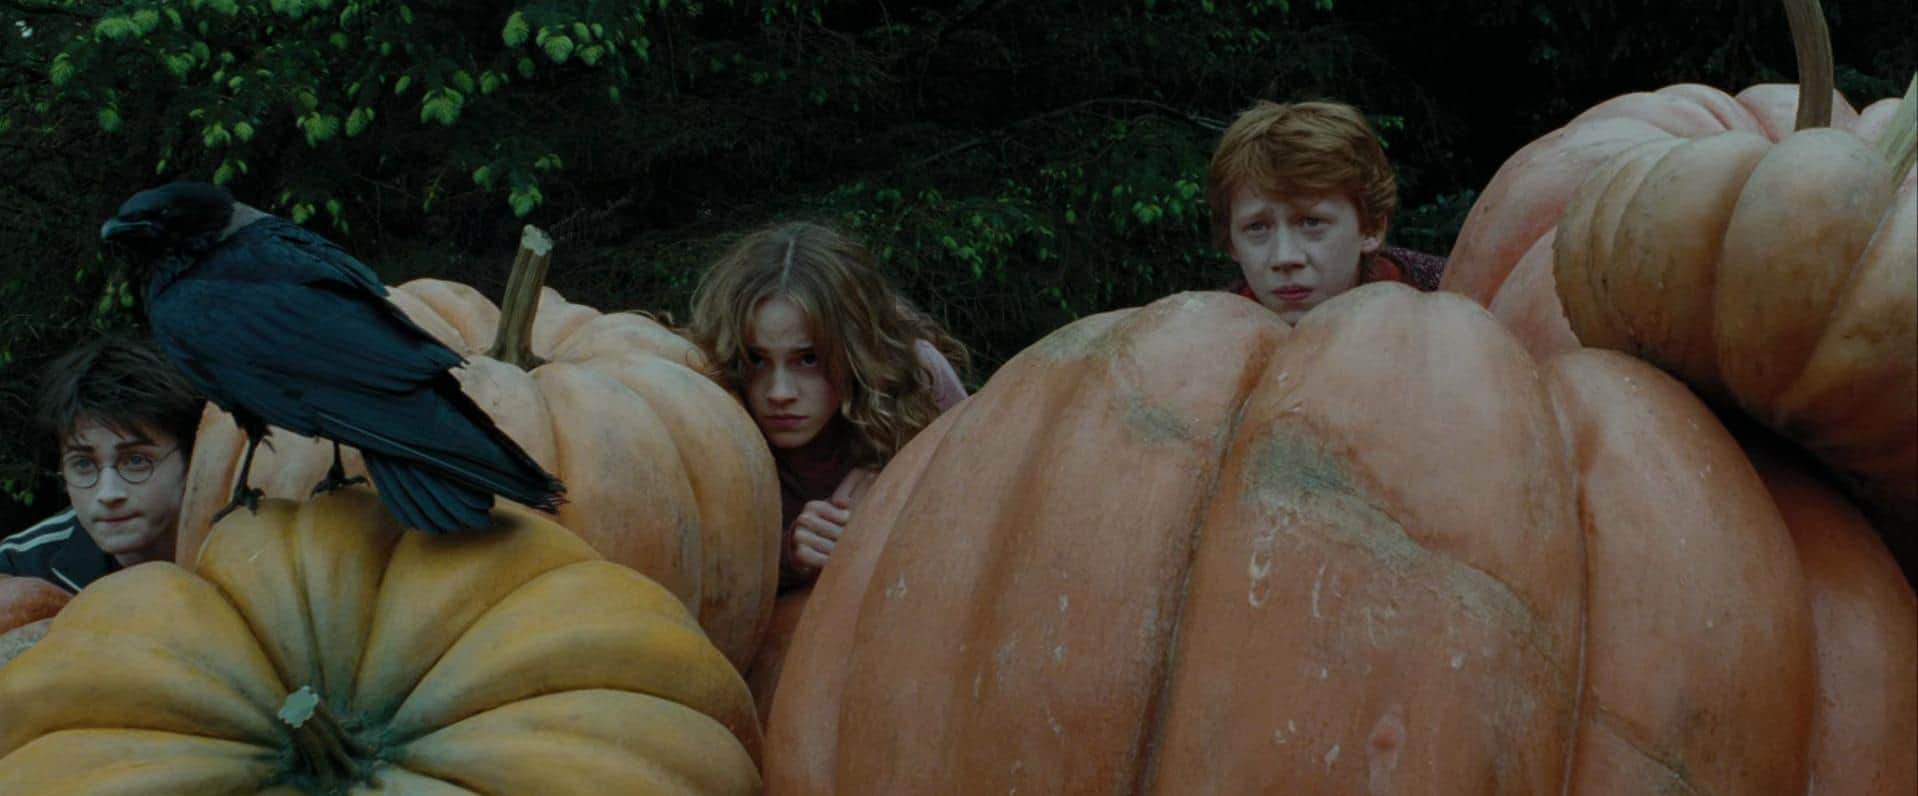 Daniel Radcliffe, Emma Watson, and Rupert Grint in this image from Warner Bros. Pictures